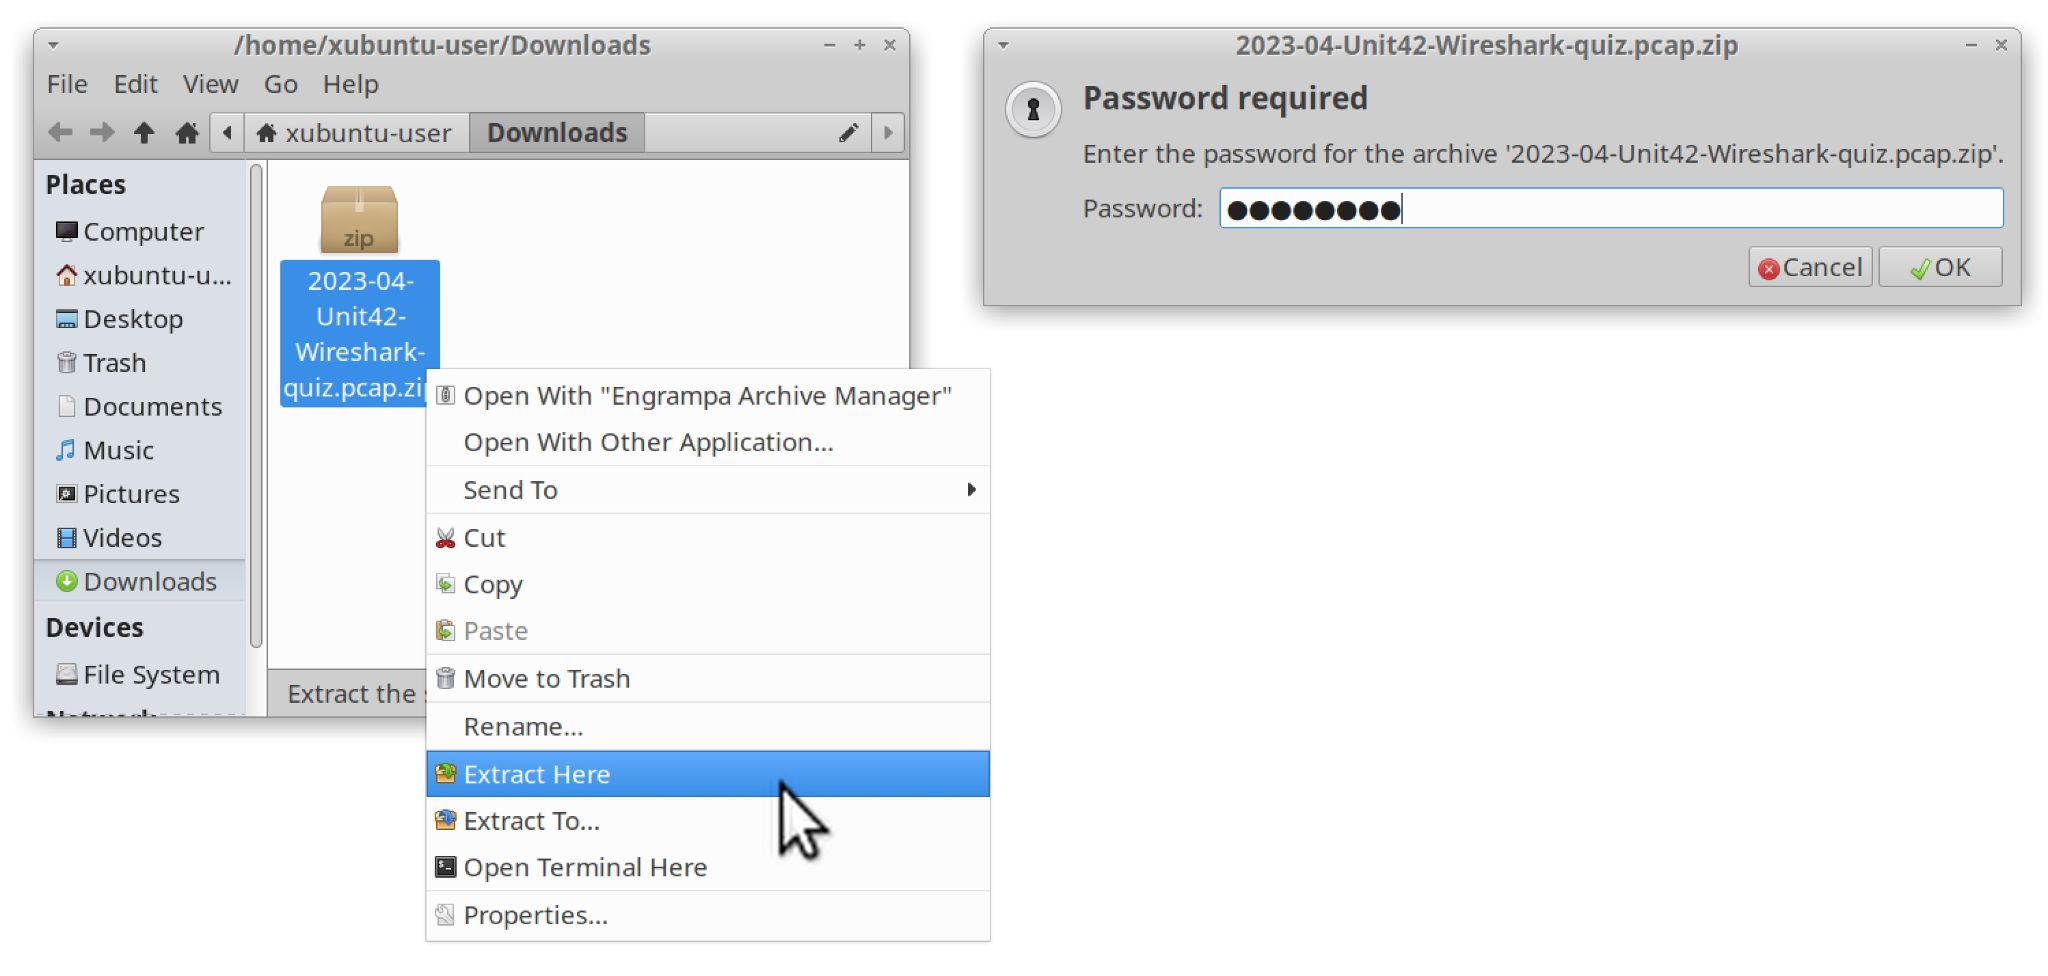 Image 3 shows how to enter the password and how to extract the password-protected .zip archive from the download folder.